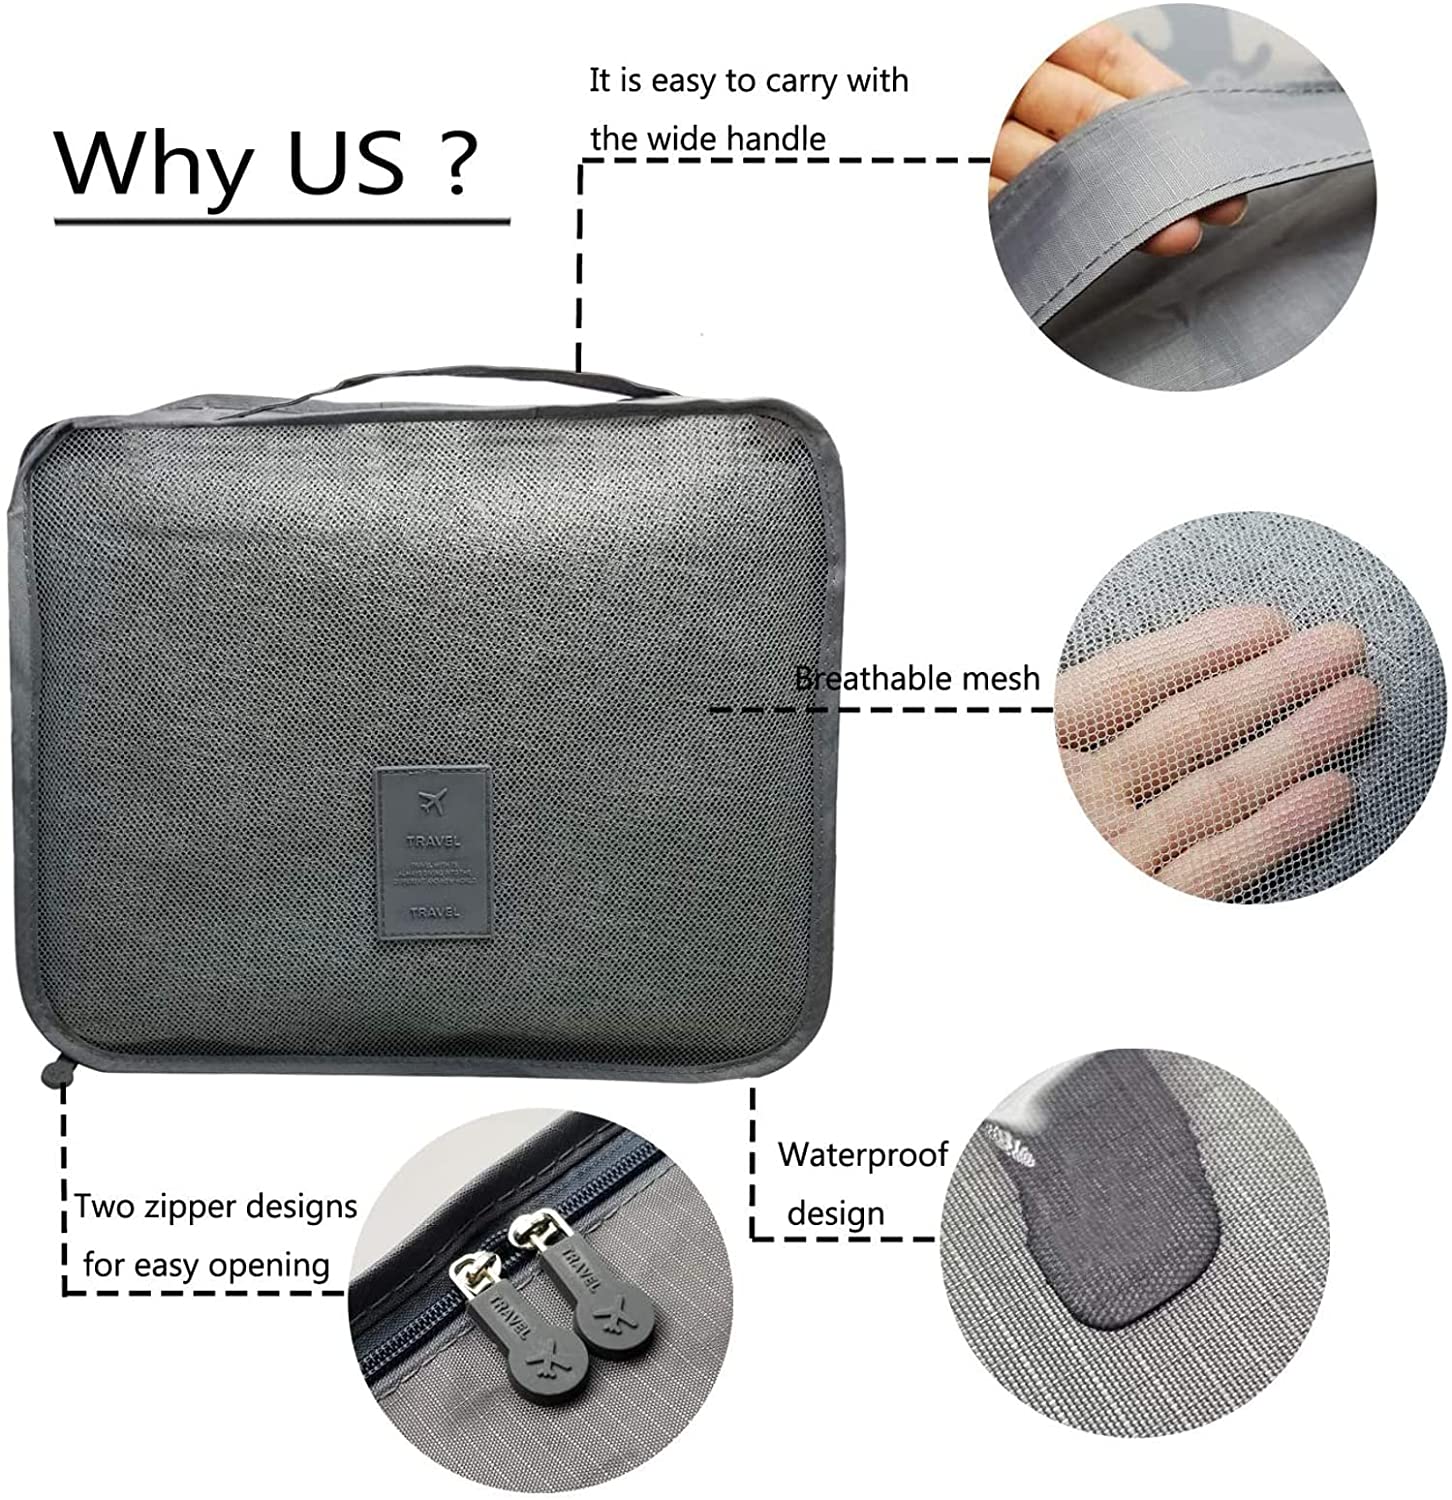 Sky-Touch 6Pcs Set Travel Luggage Organizer Packing Cubes Set Storage Bag Waterproof Laundry Bag Traveling Accessories - Gray